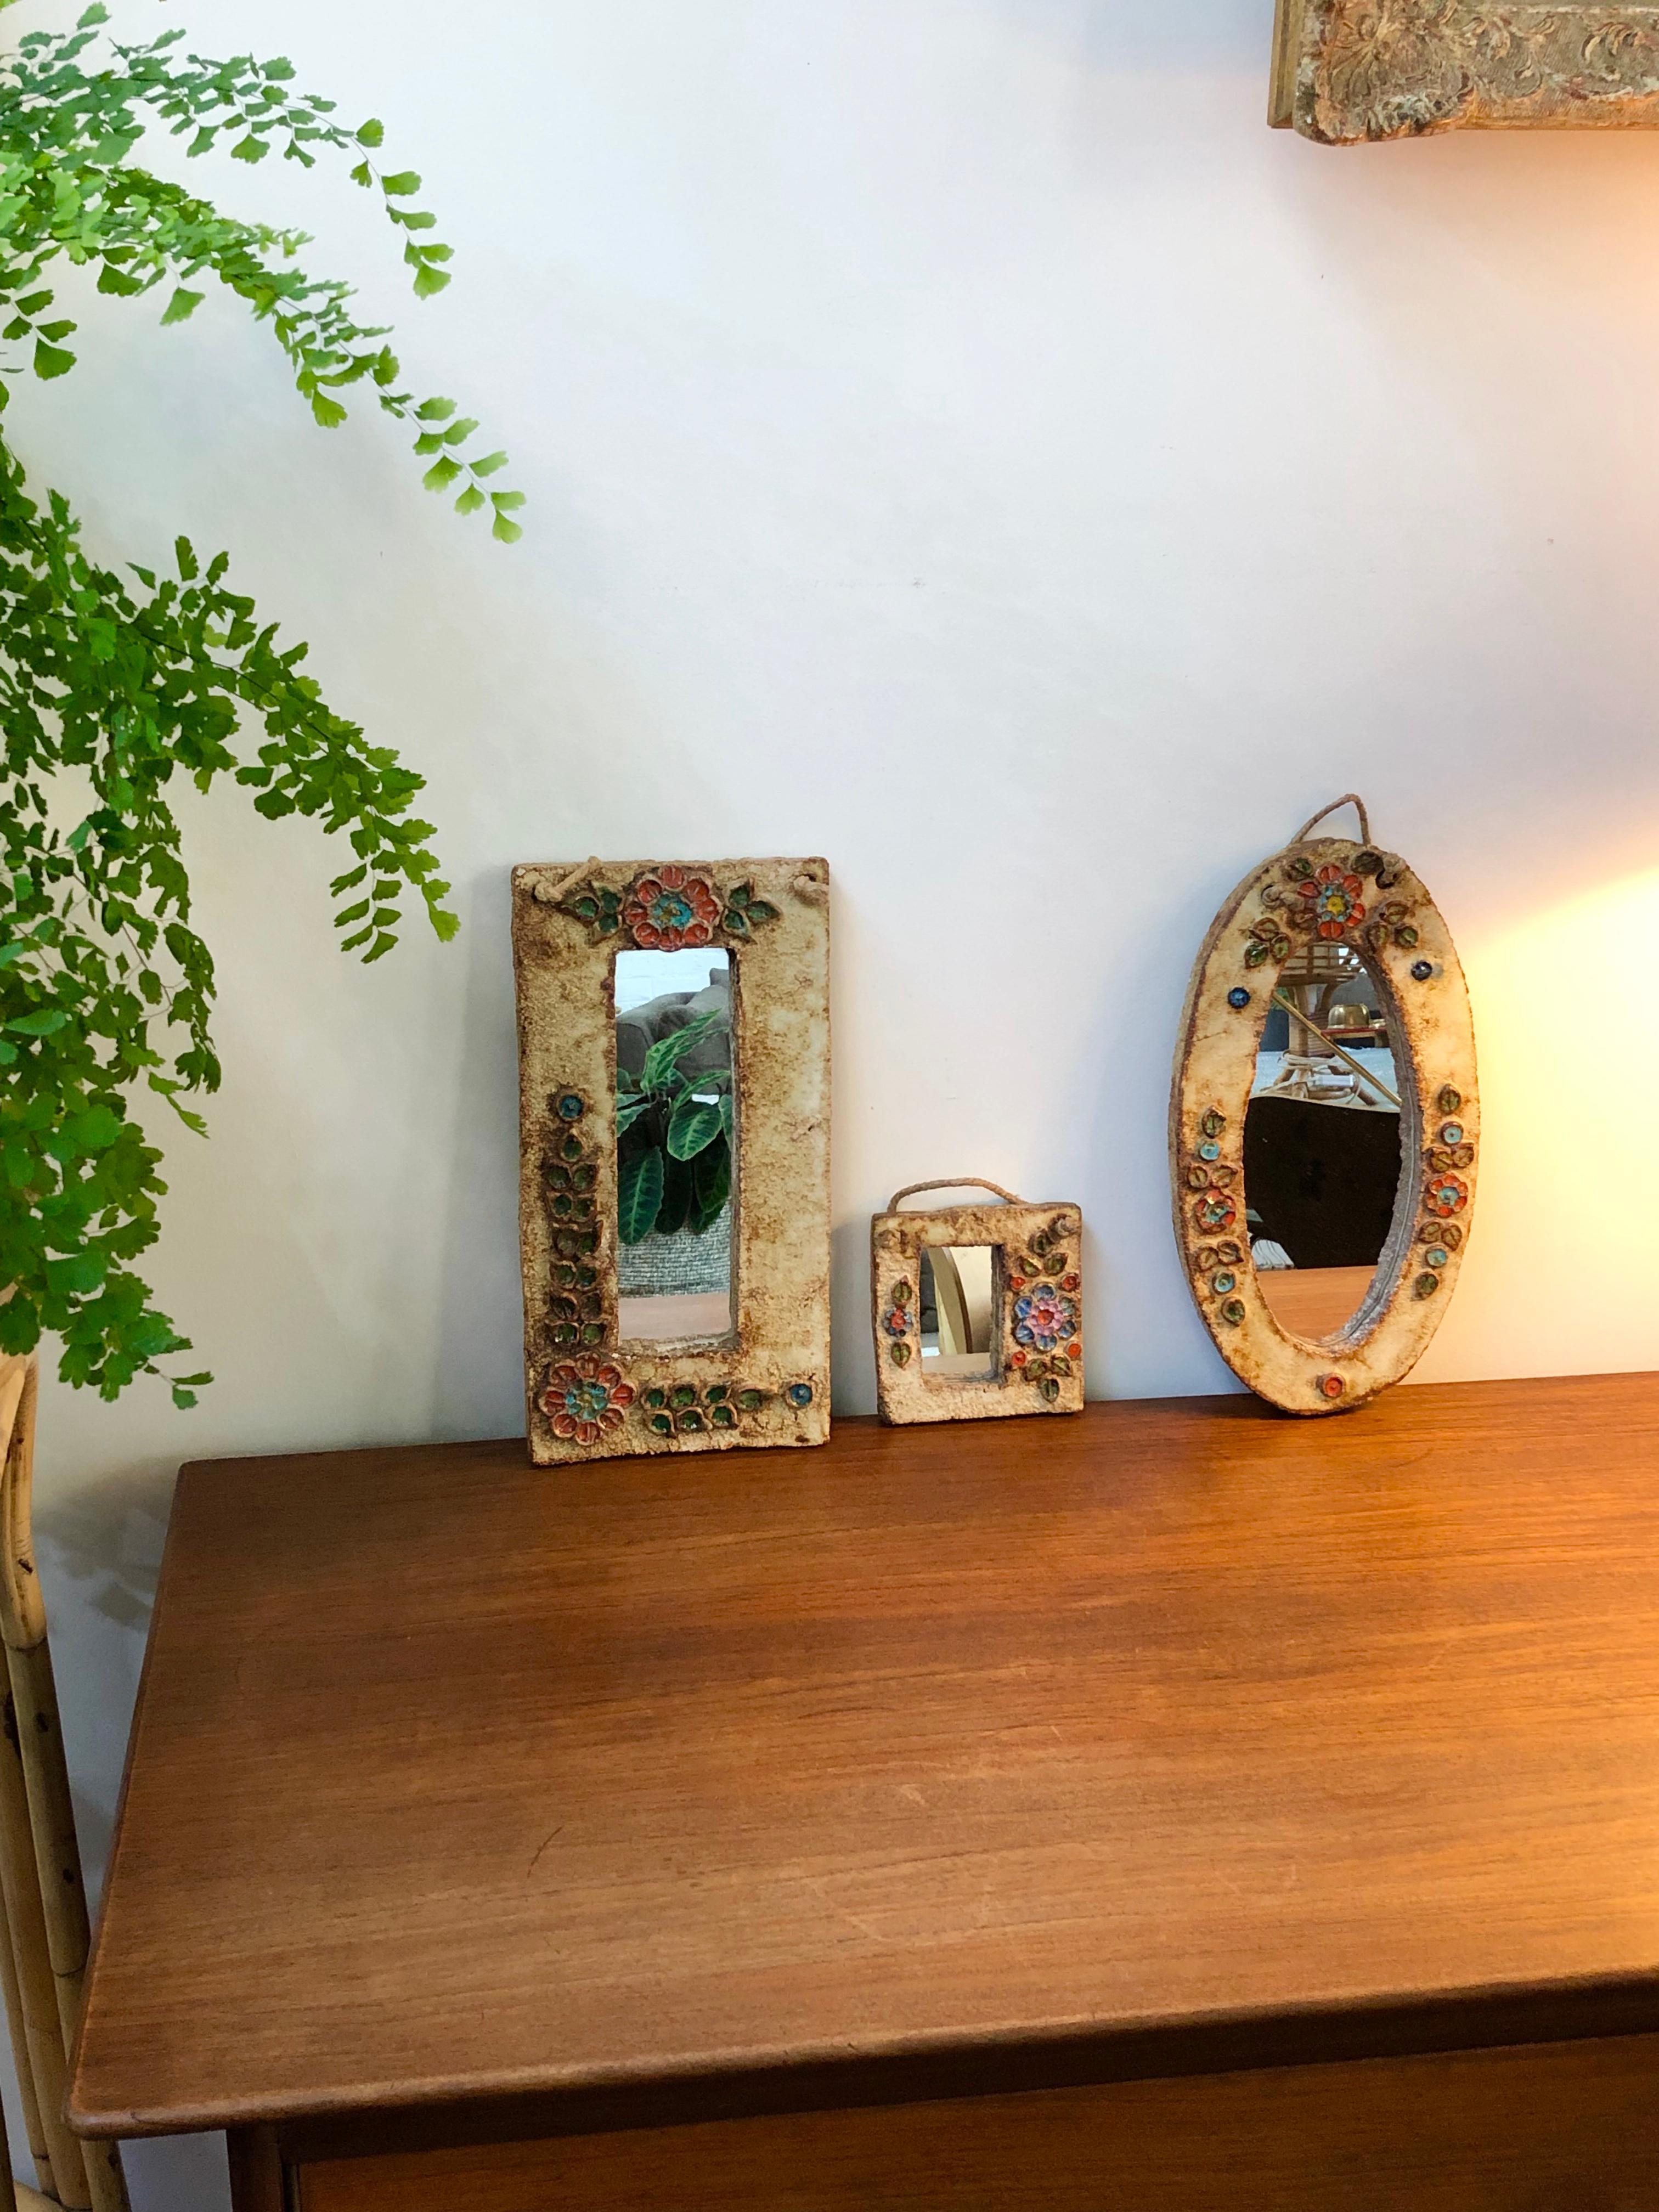 Small ceramic flower-motif wall mirror and glazed leaves attributed to La Roue, Vallauris, France (circa 1960s). A charming, decorative mirror with rustic but colourful details surrounding the diminutive square mirror. In good vintage condition